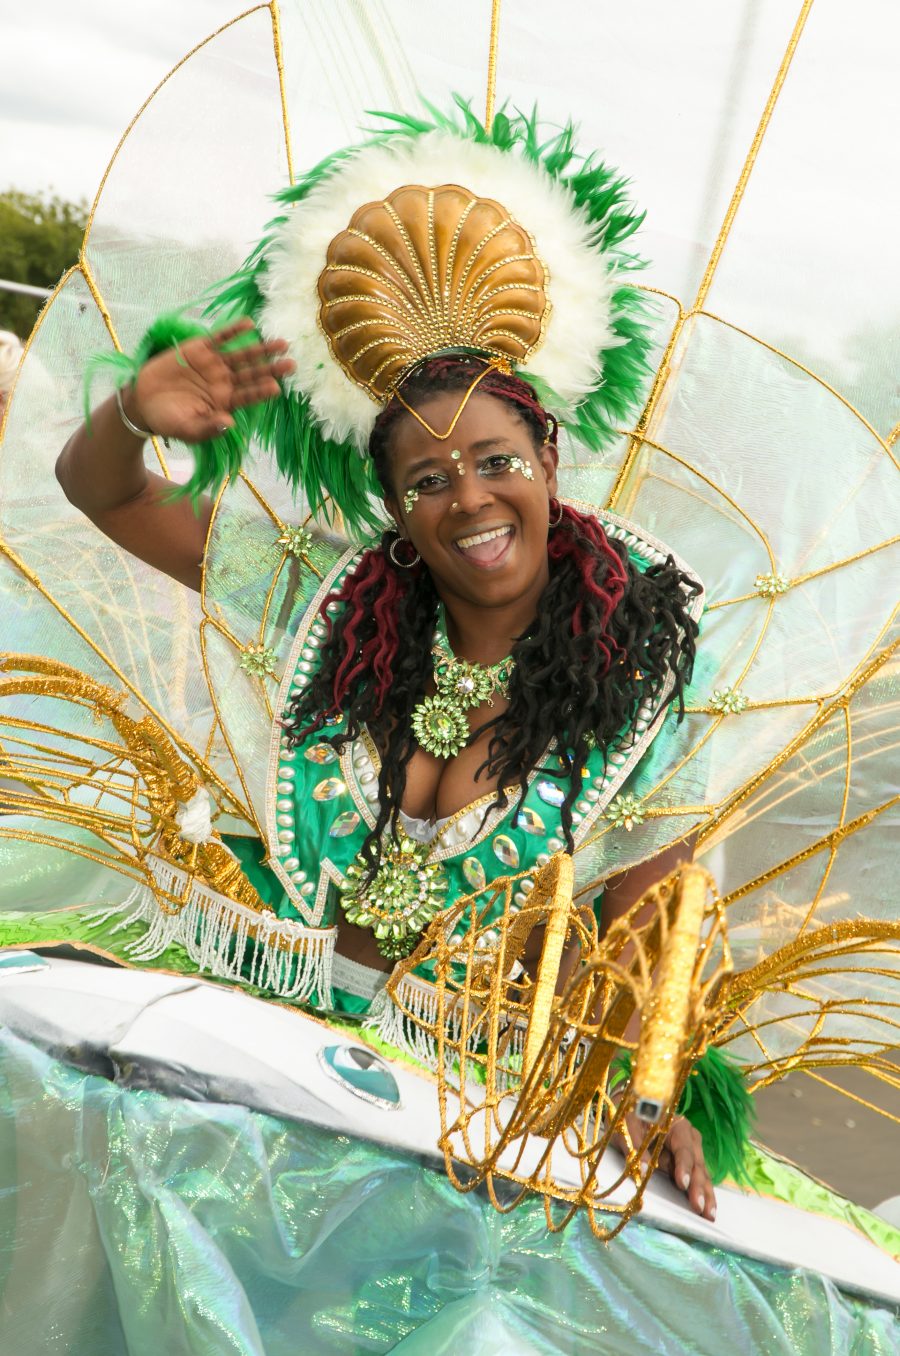 ﻿Nottingham Carnival brings its own brand of sunshine into the city